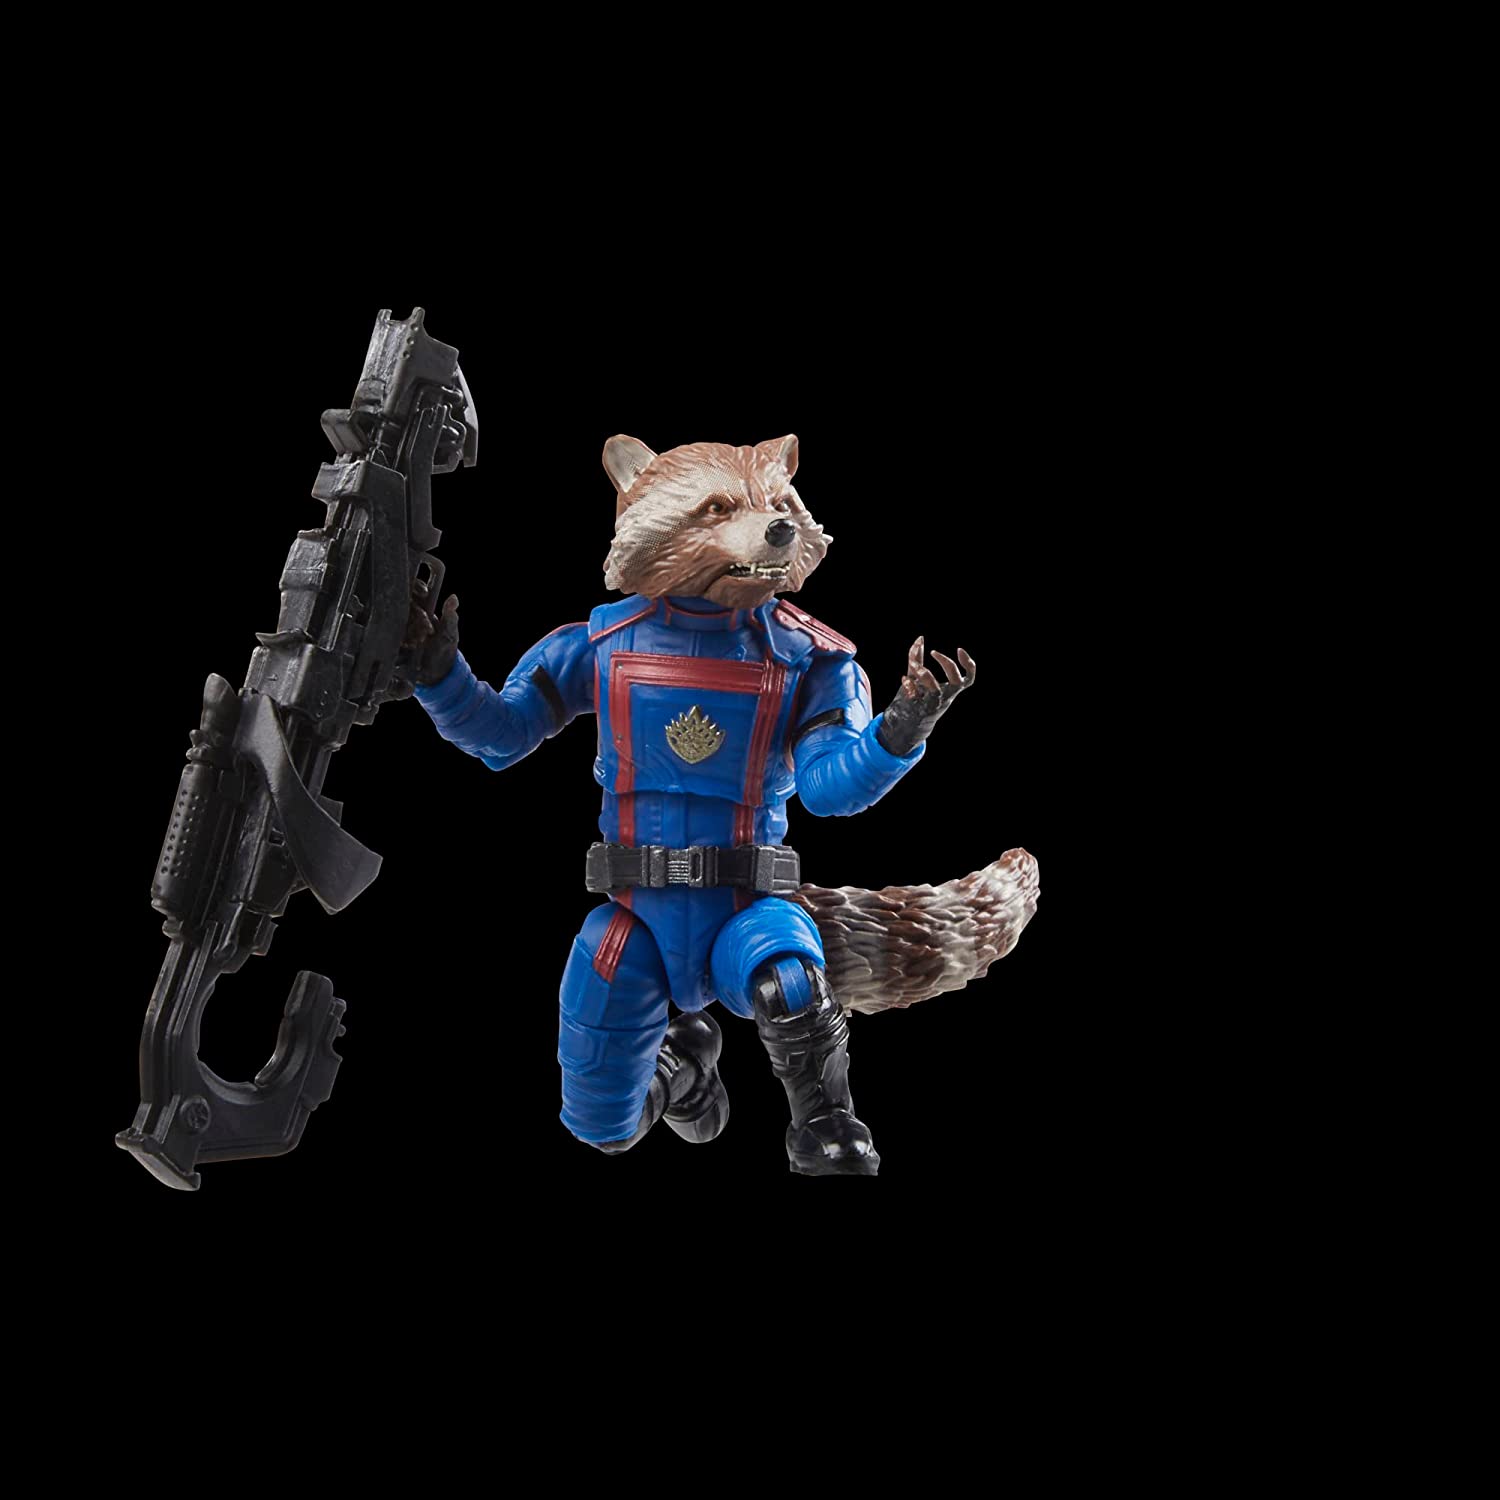 Guardians of The Galaxy Vol. 3 Marvel Legends Rocket 6-Inch Action Figure Toy sitting pose - Heretoserveyou